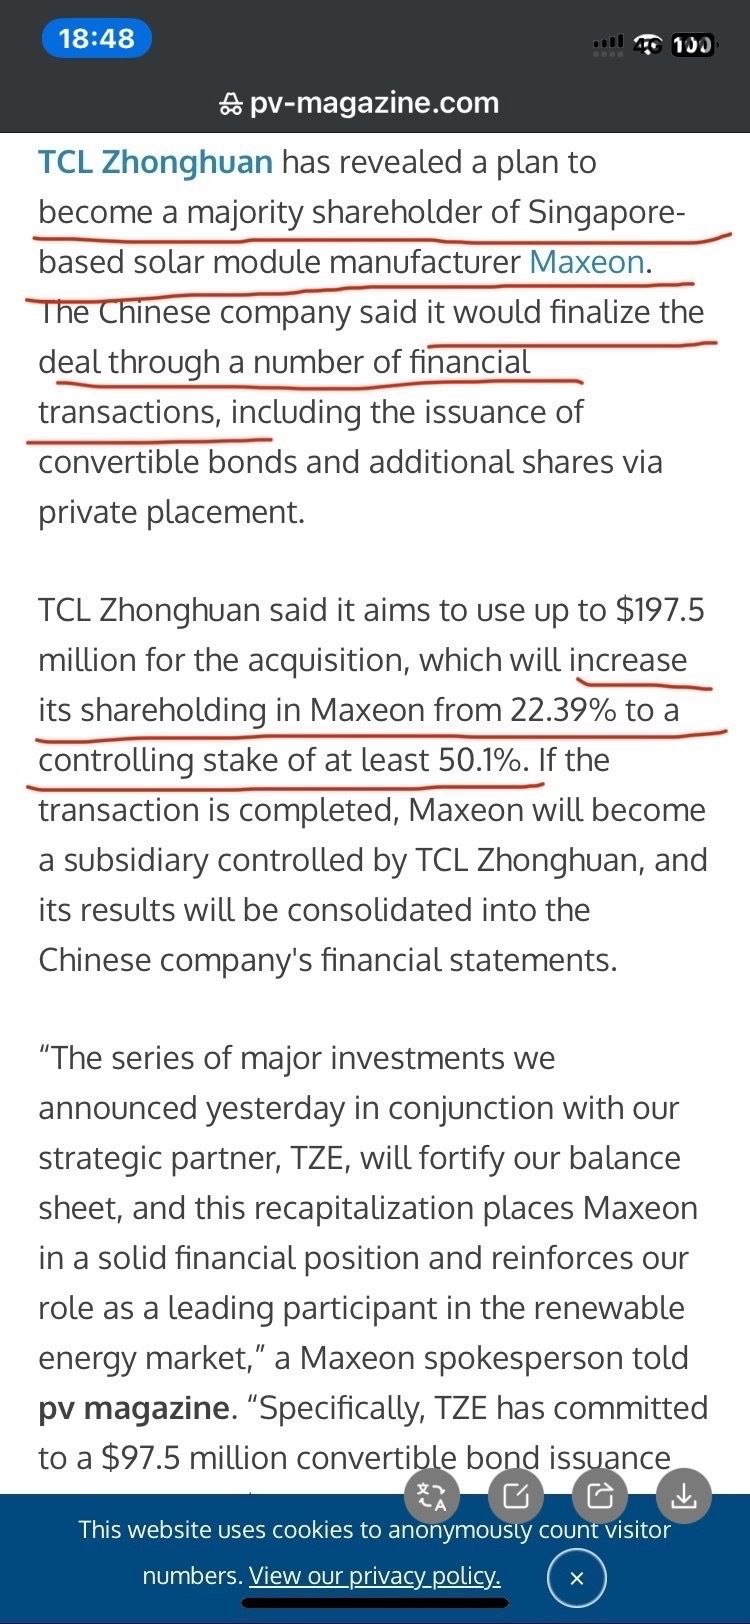 $Maxeon Solar Technologies (MAXN.US)$ This is a very good news，I bought a lot！[Happy][Happy][Happy][Happy][Happy][Happy][Happy]🔥🔥🔥